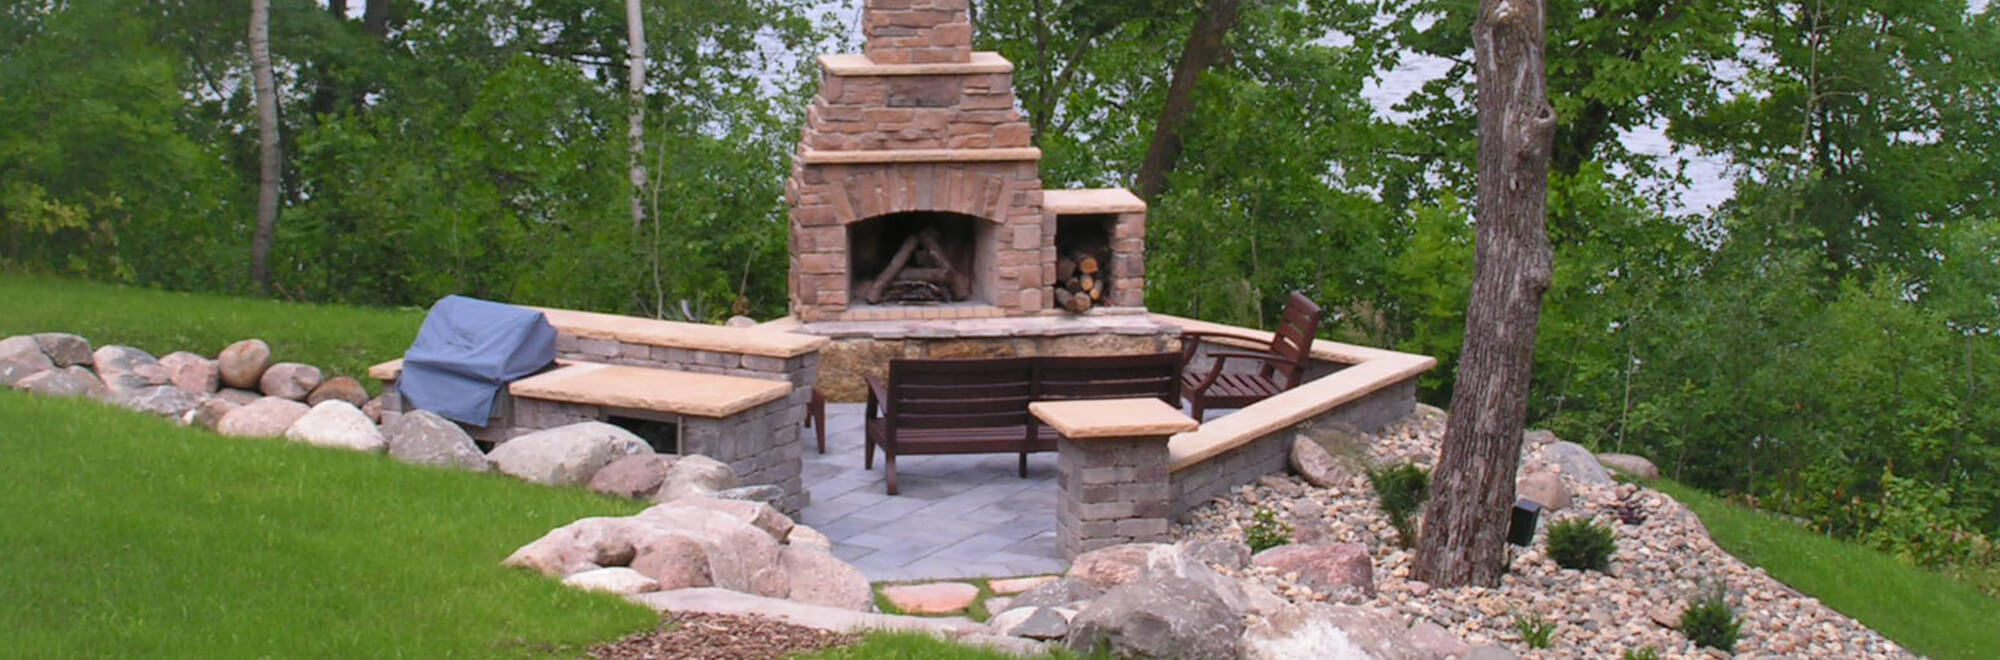 Outdoor living space in a backyard complete with paver patio, block seating wall, outdoor kitchen, and stone fireplace